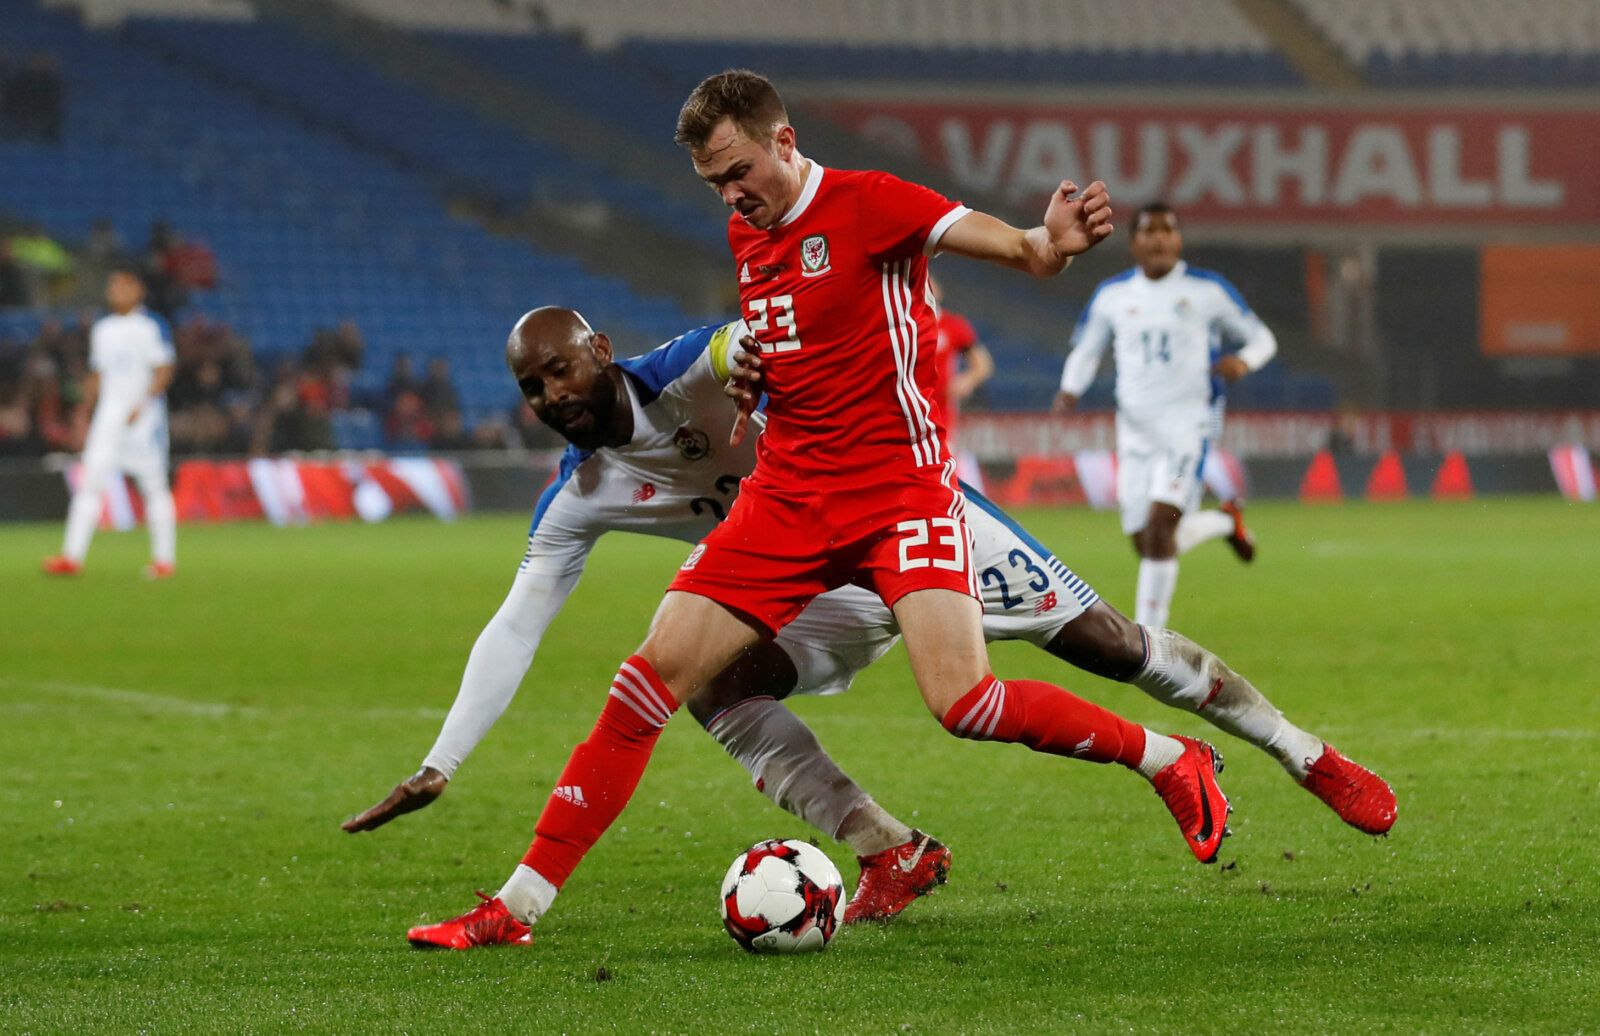 Soccer Football - International Friendly - Wales vs Panama - Cardiff City Stadium, Cardiff, Britain - November 14, 2017   Wales’ Ryan Hedges in action with Panama’s Felipe Baloy             Action Images via Reuters/Matthew Childs